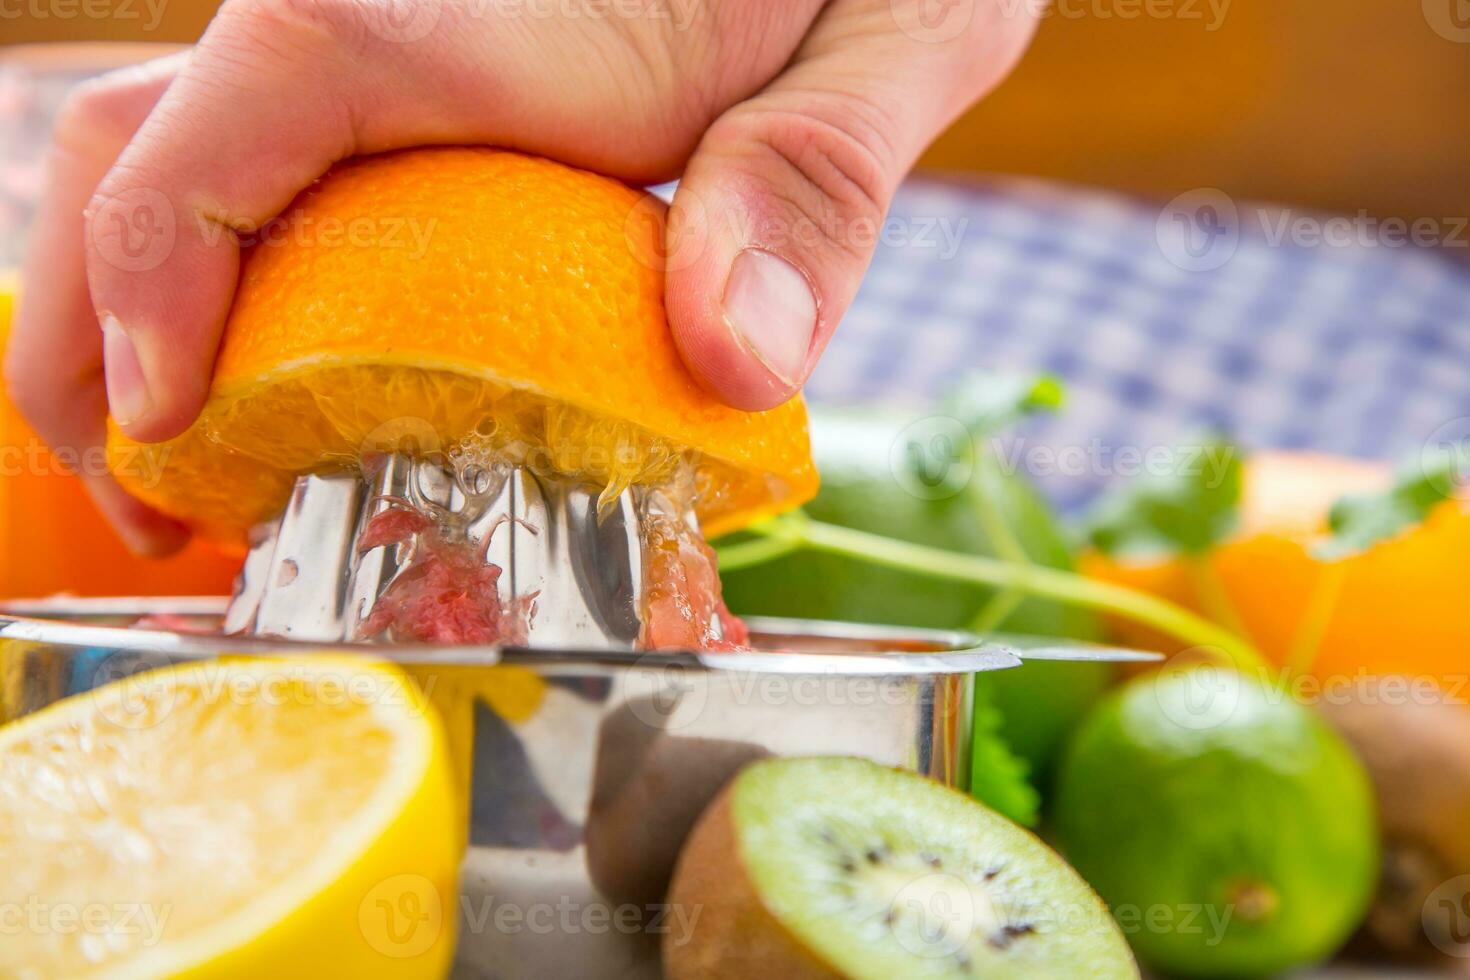 Preparation of orange grape or multivitamin juice, hands squeeze juice on a manual metal juicer surrounded by fresh tropical fruit photo